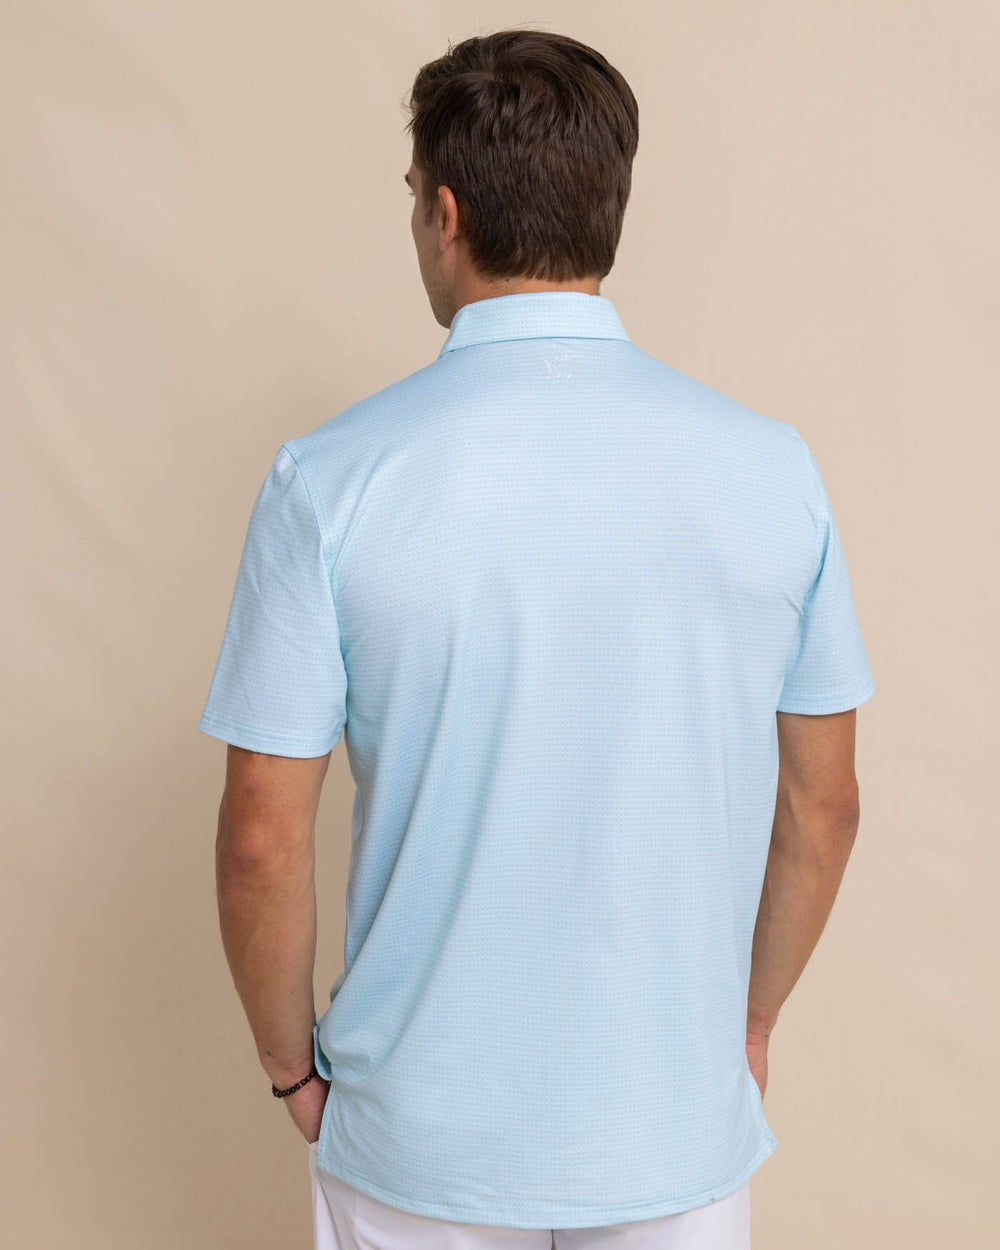 The back view of the Southern Tide Driver Getting Ziggy With It Printed Polo by Southern Tide - Wake Blue